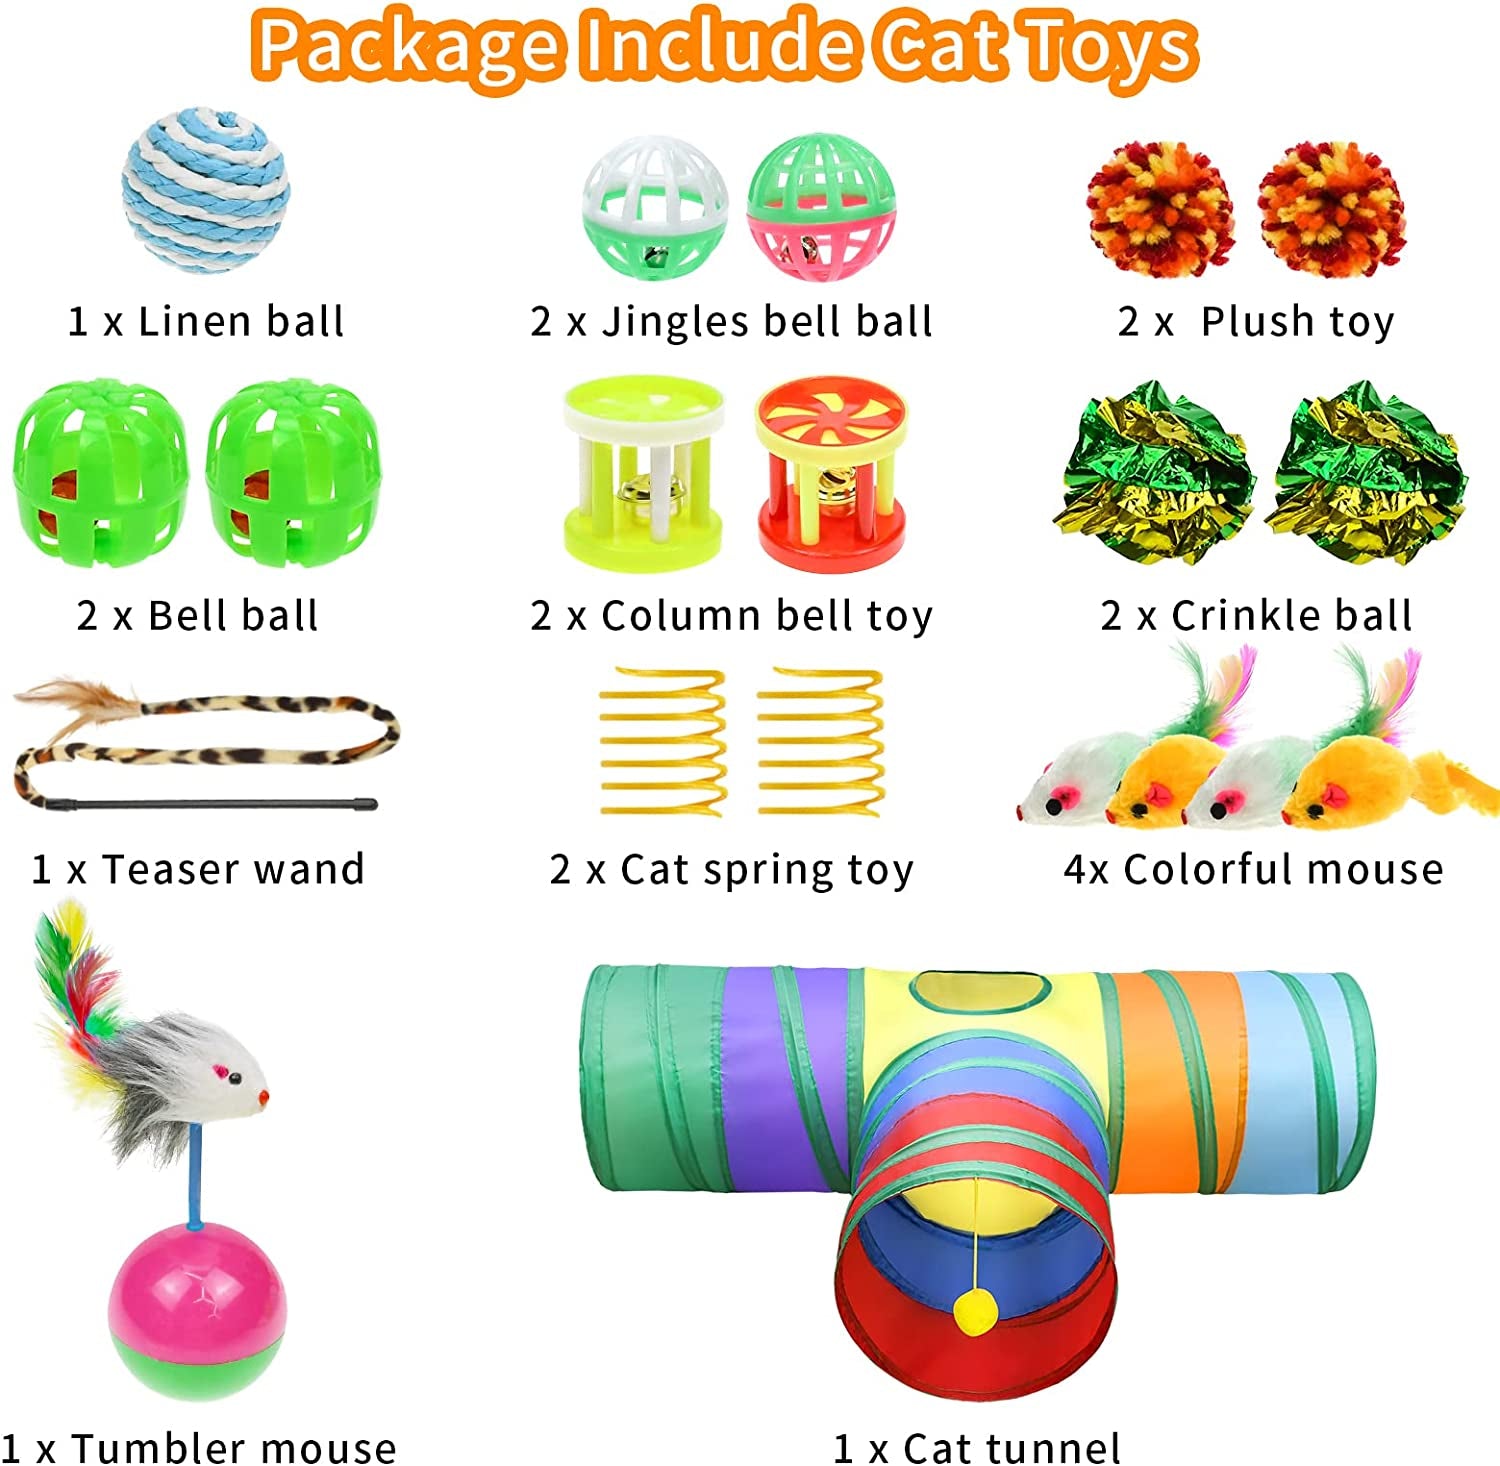 Interactive Cat Tunnel Toys Set with Feather Toy, Crinkle Balls, and 3-Way Tube - Great for Kittens and Cats